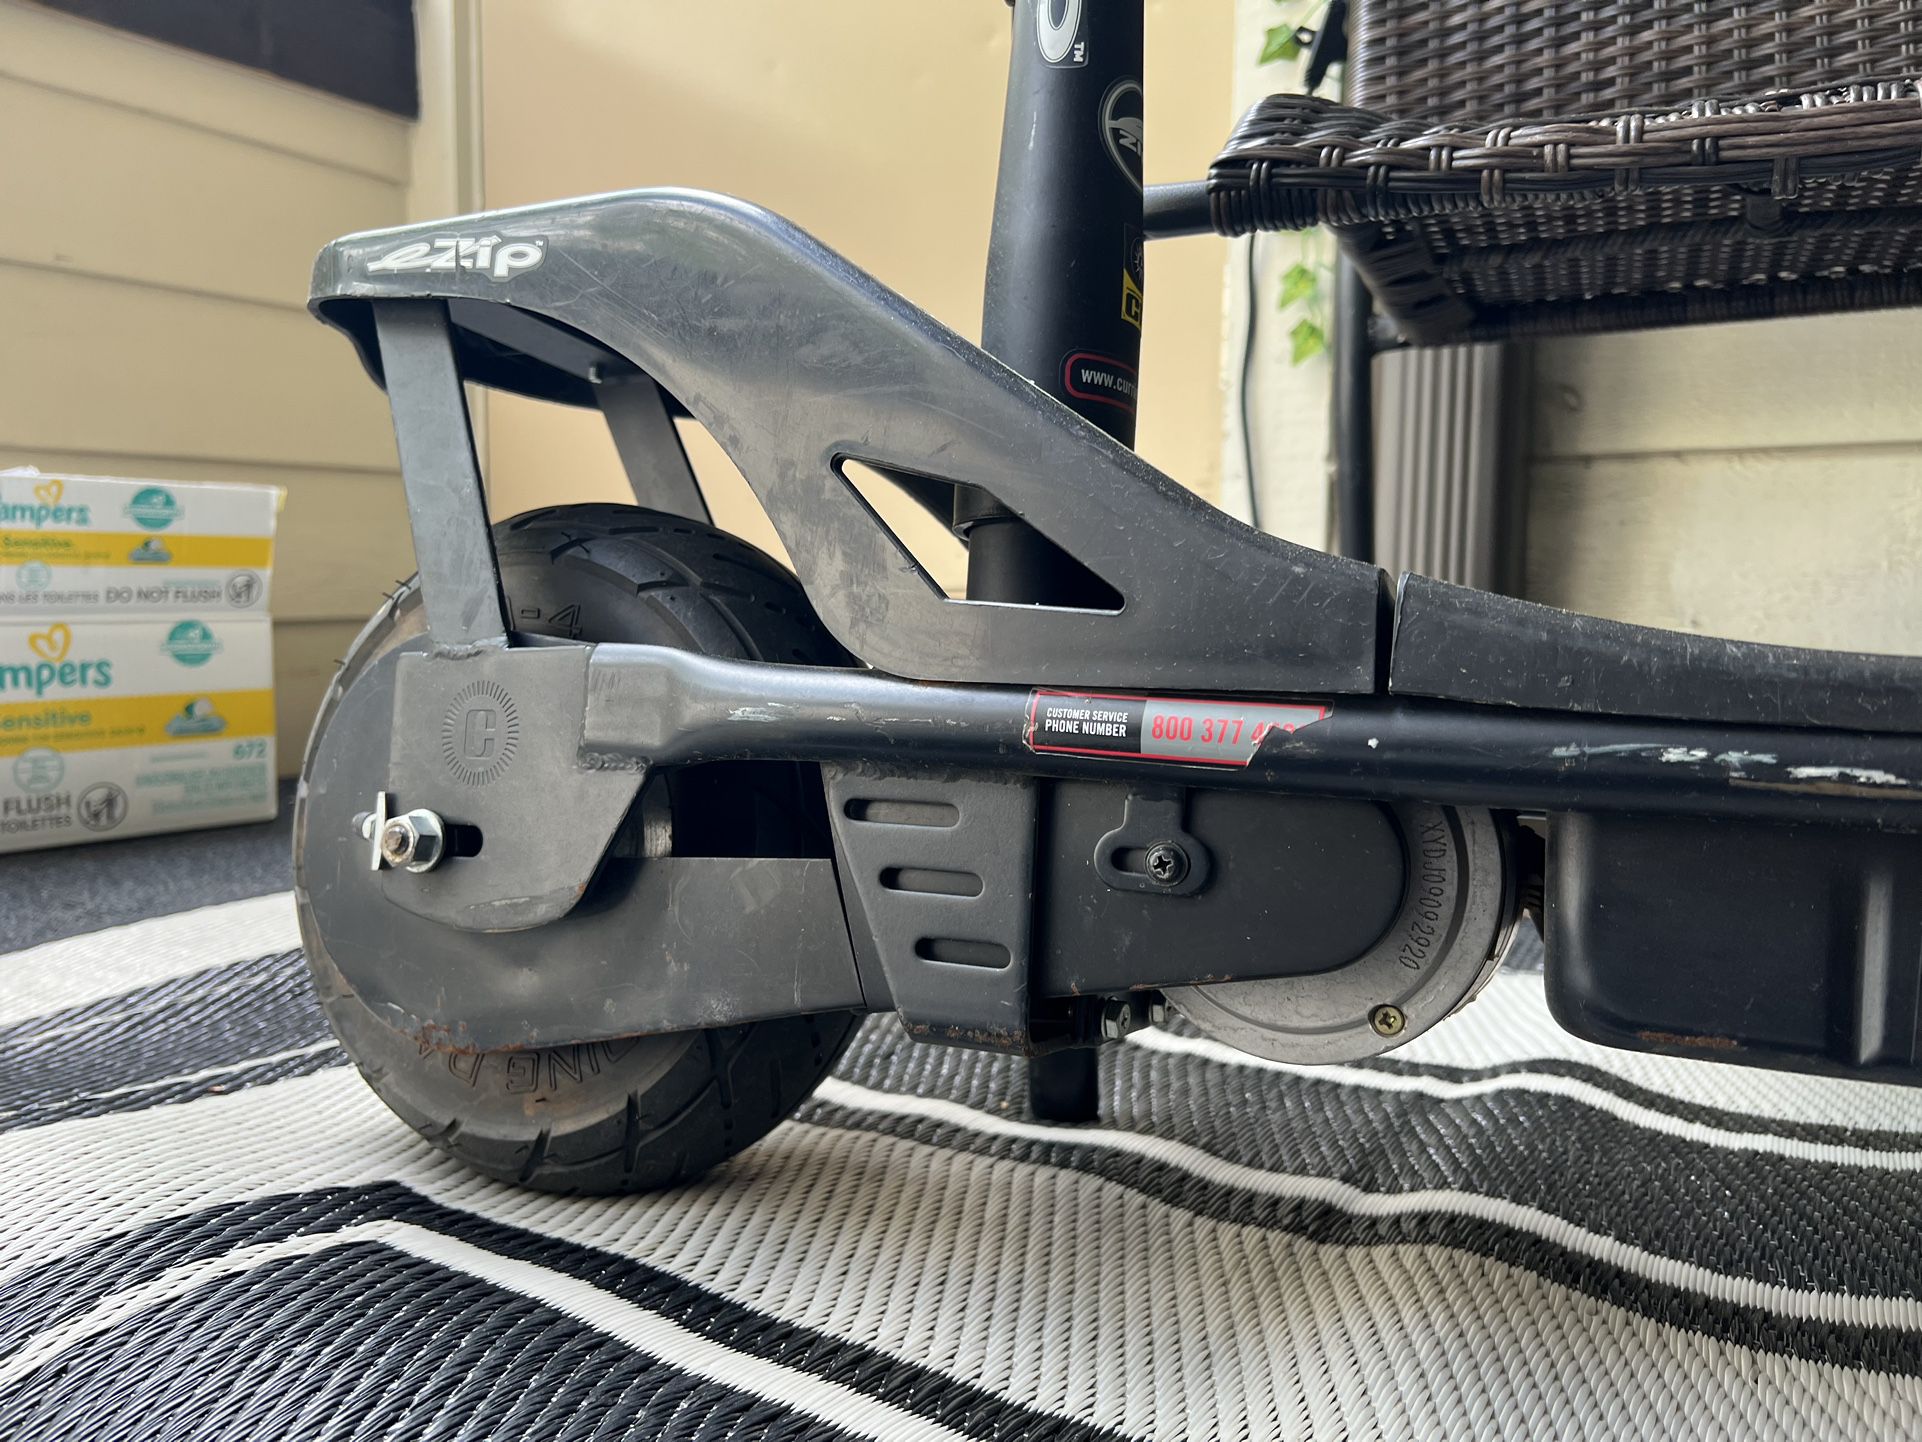 Ezip Electric Scooter.